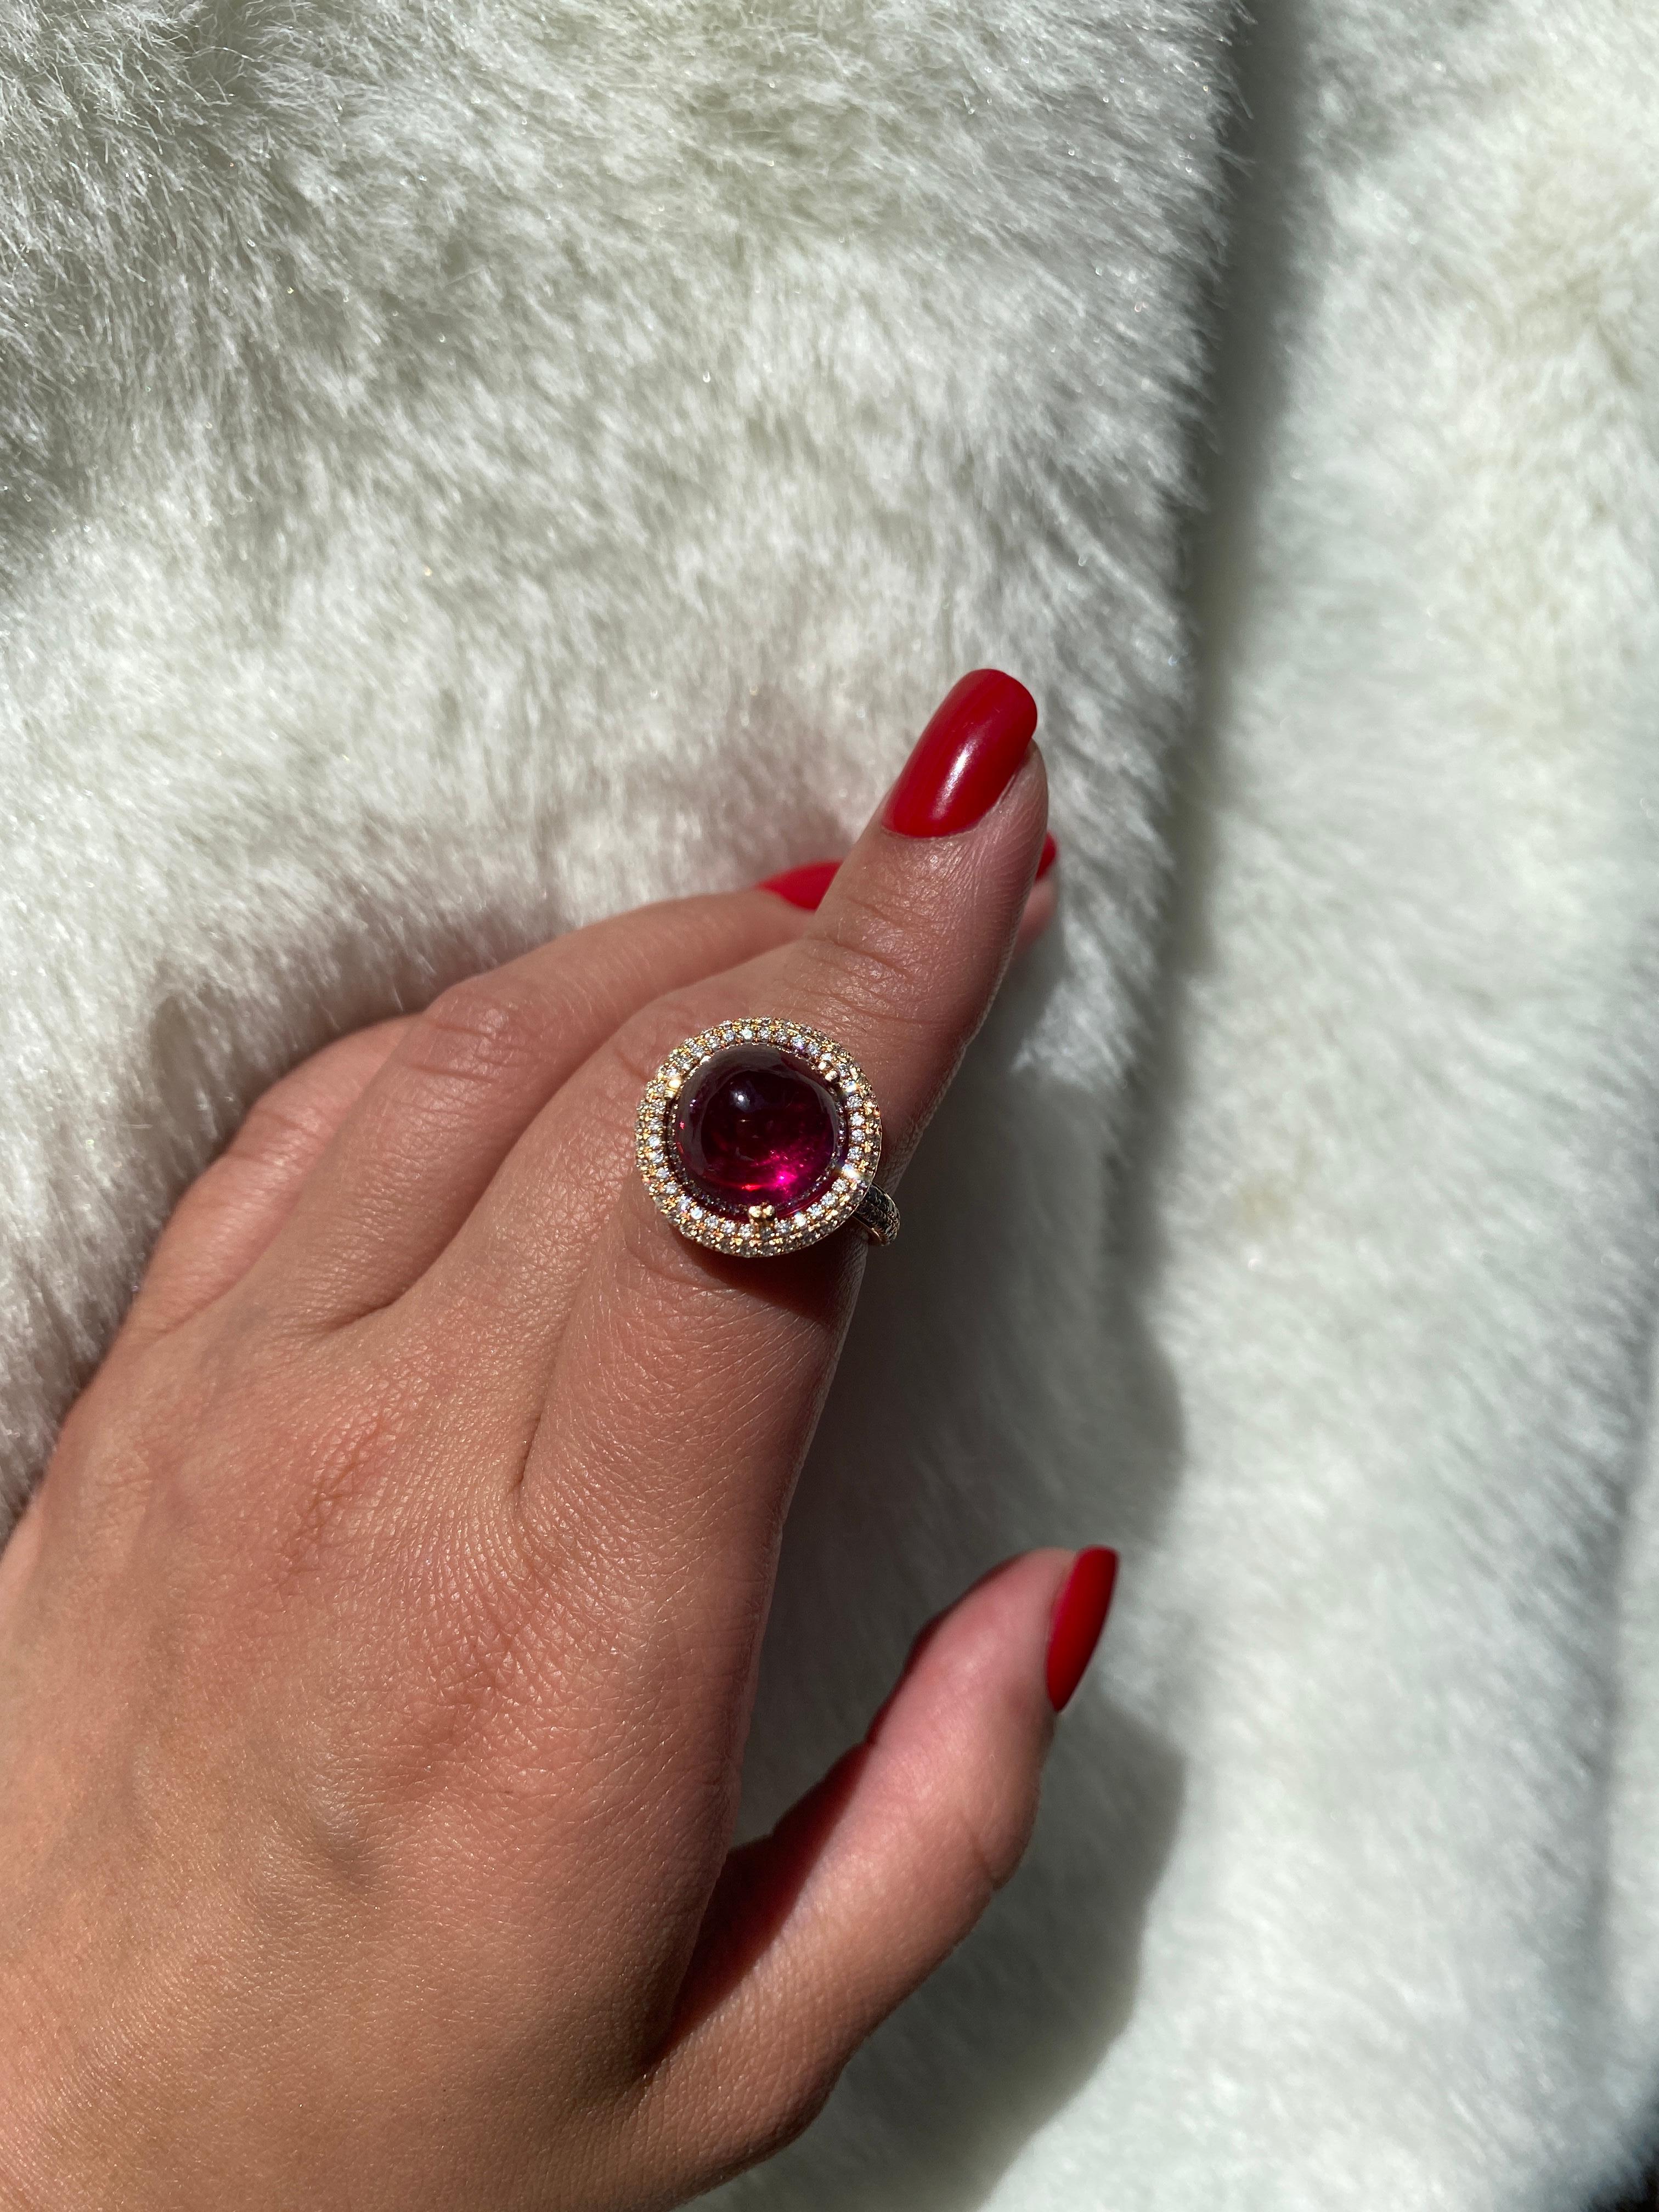 This very special and fine Rubelite Round Cabochon Ring in 18K Rose gold with diamonds is from 'G-One' Collection. This ring is perfect for an everyday look and can be carried to a night out.

* Gemstone size: 11.8 mm
* Gemstone: 100% Earth Mined 
*